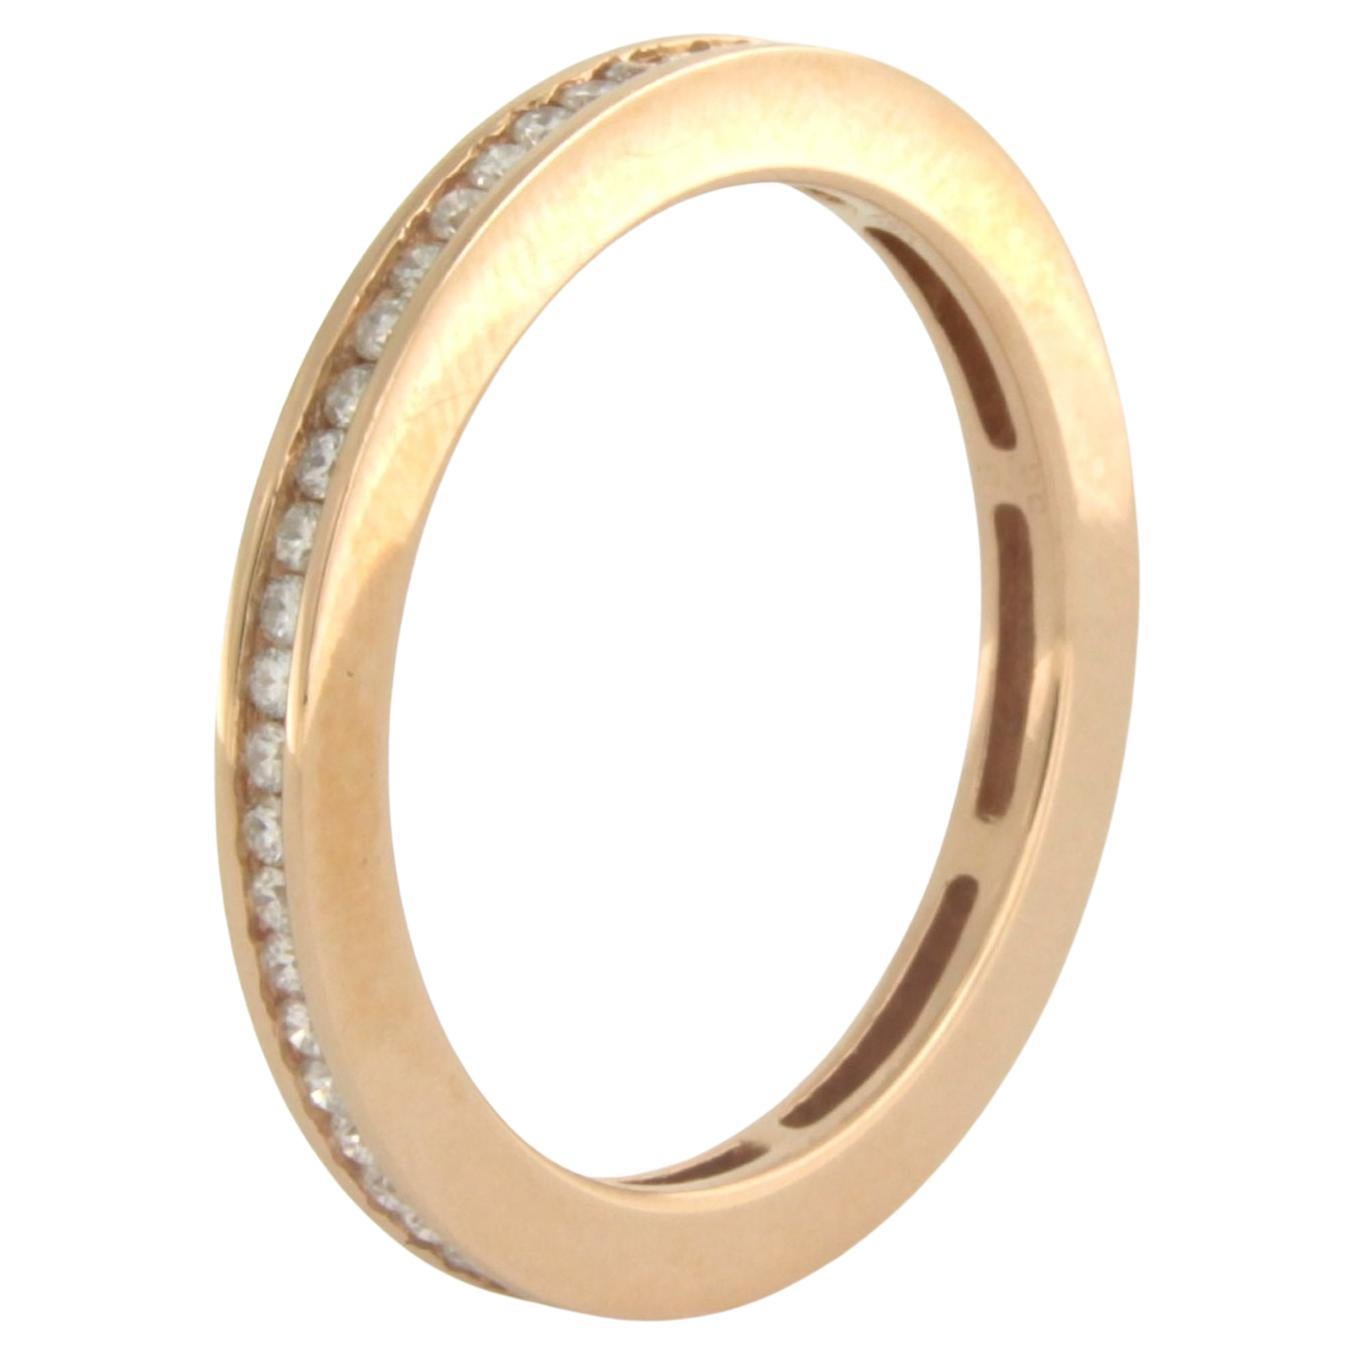 Eternity Ring with diamonds up to 0.60ct. 18k pink gold